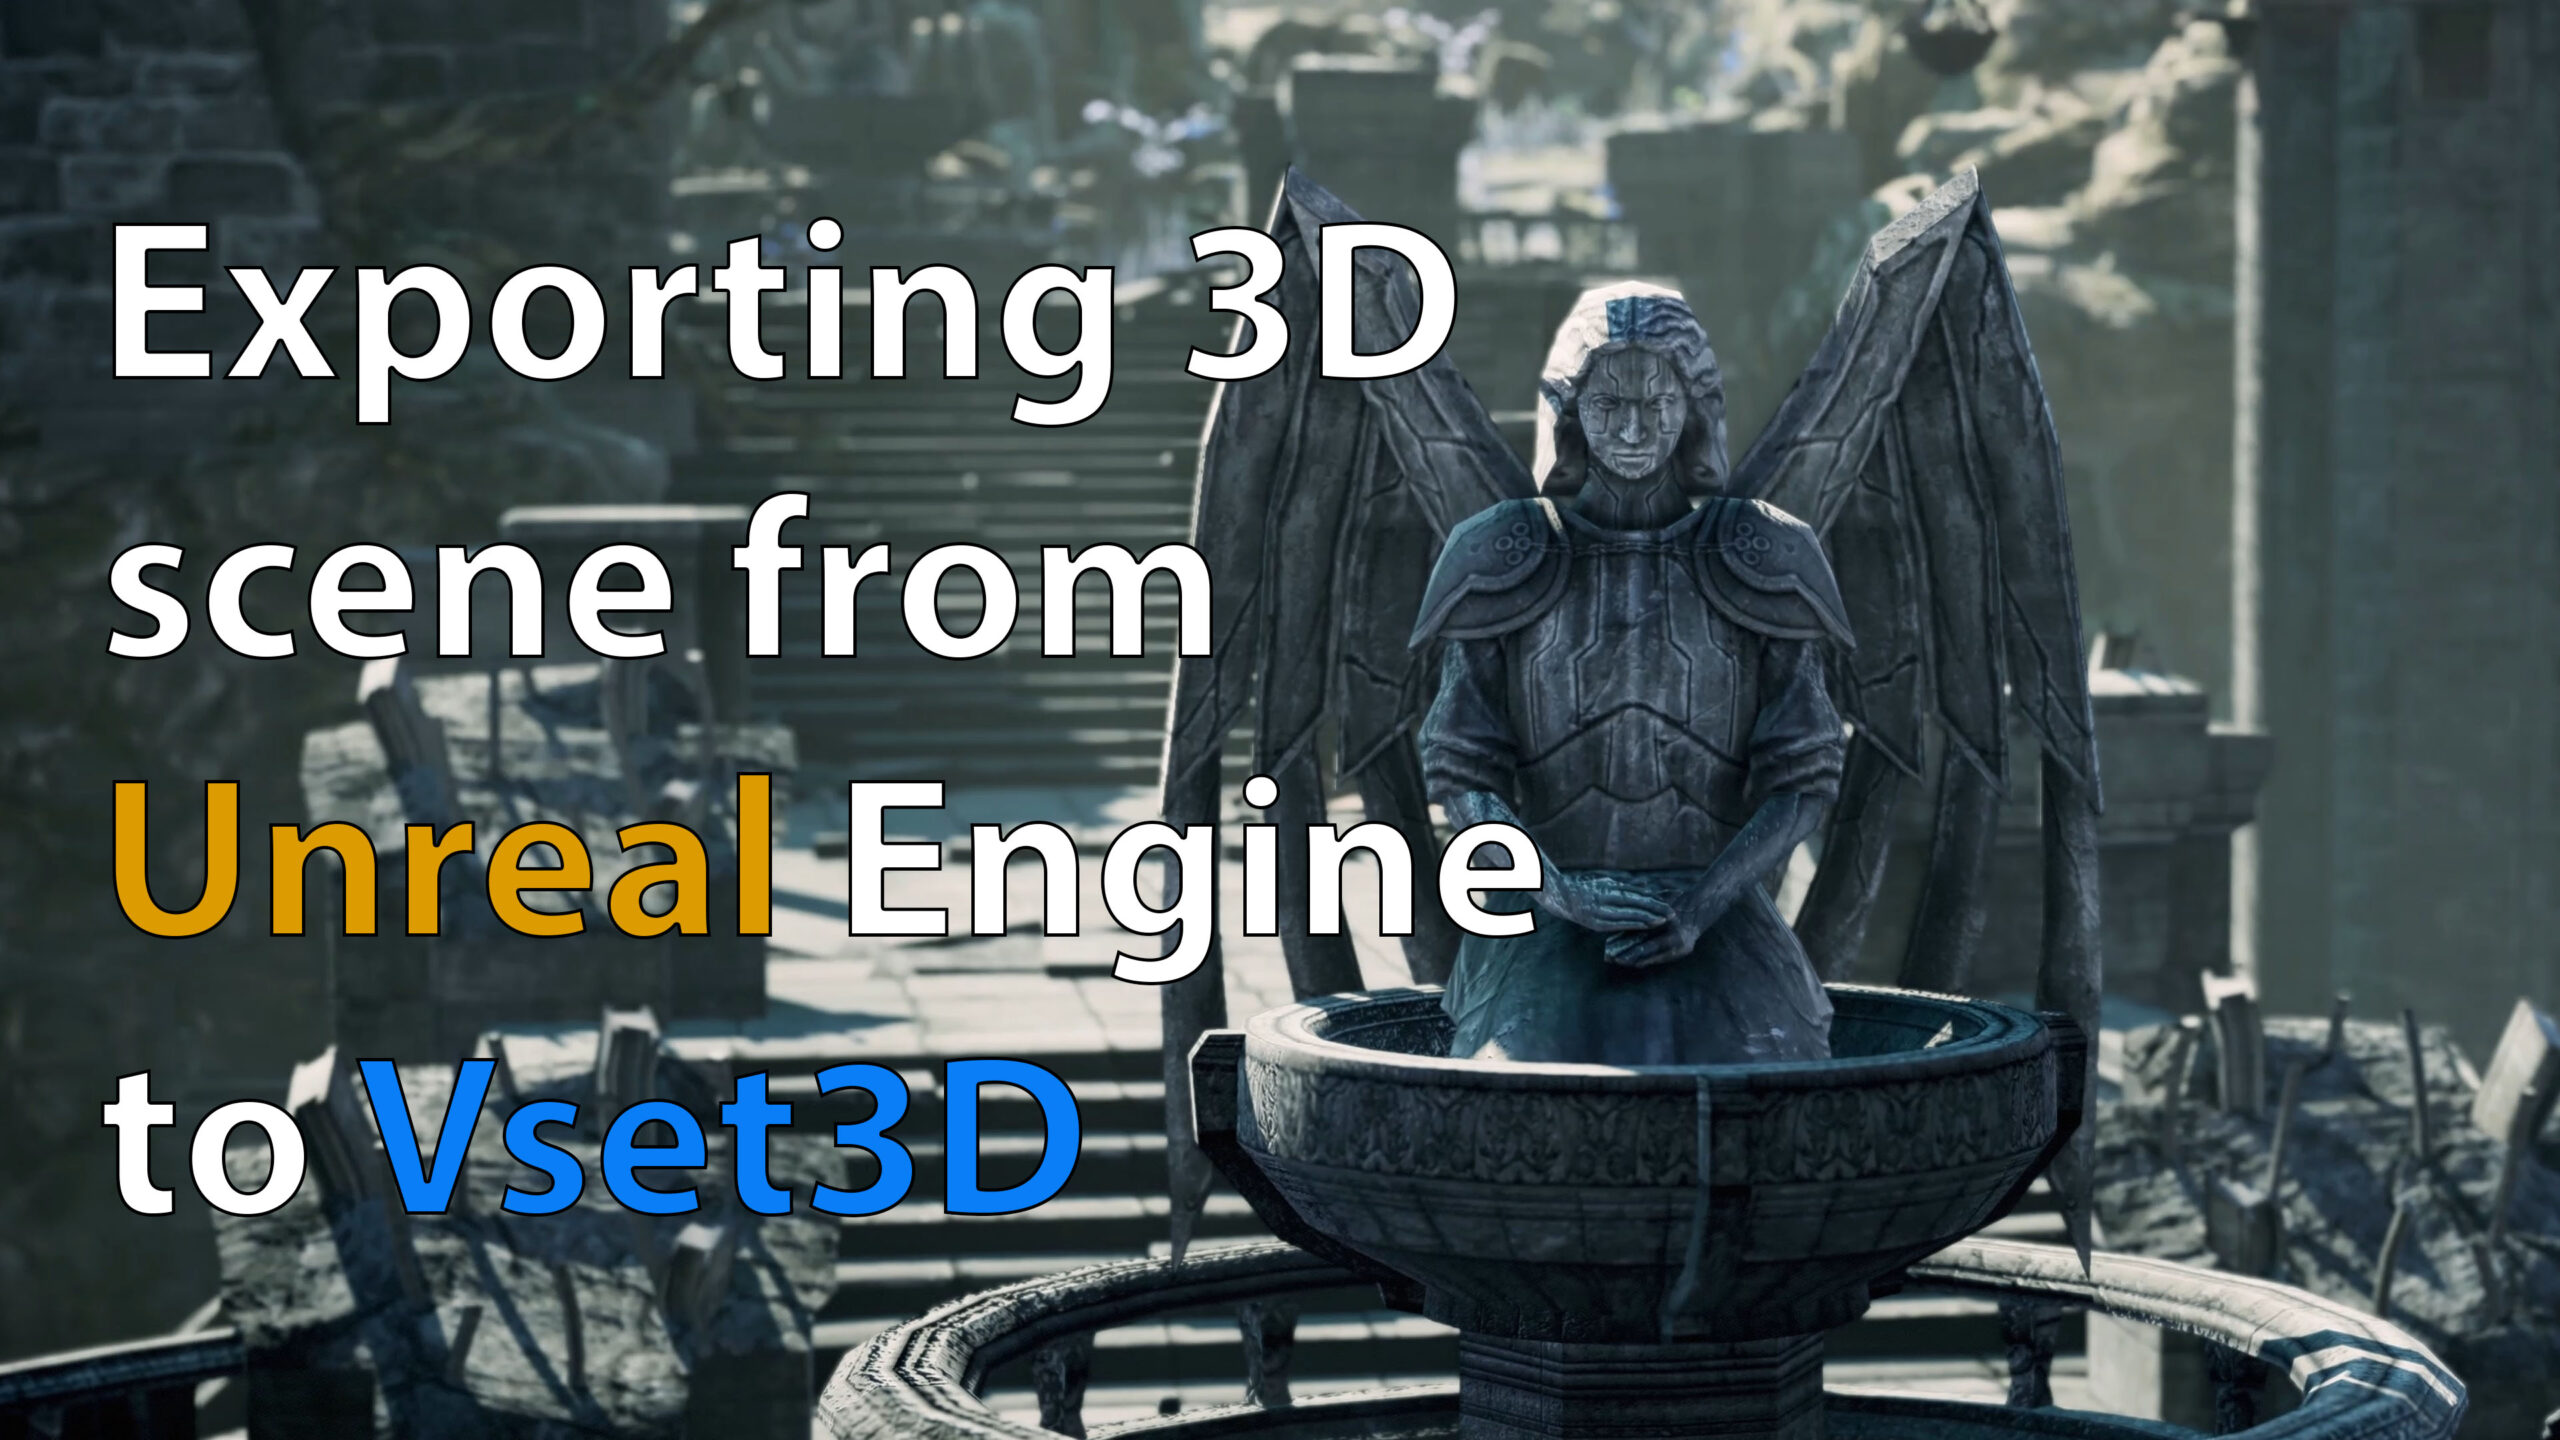 How to export an Unreal Engine scene to Vset3D